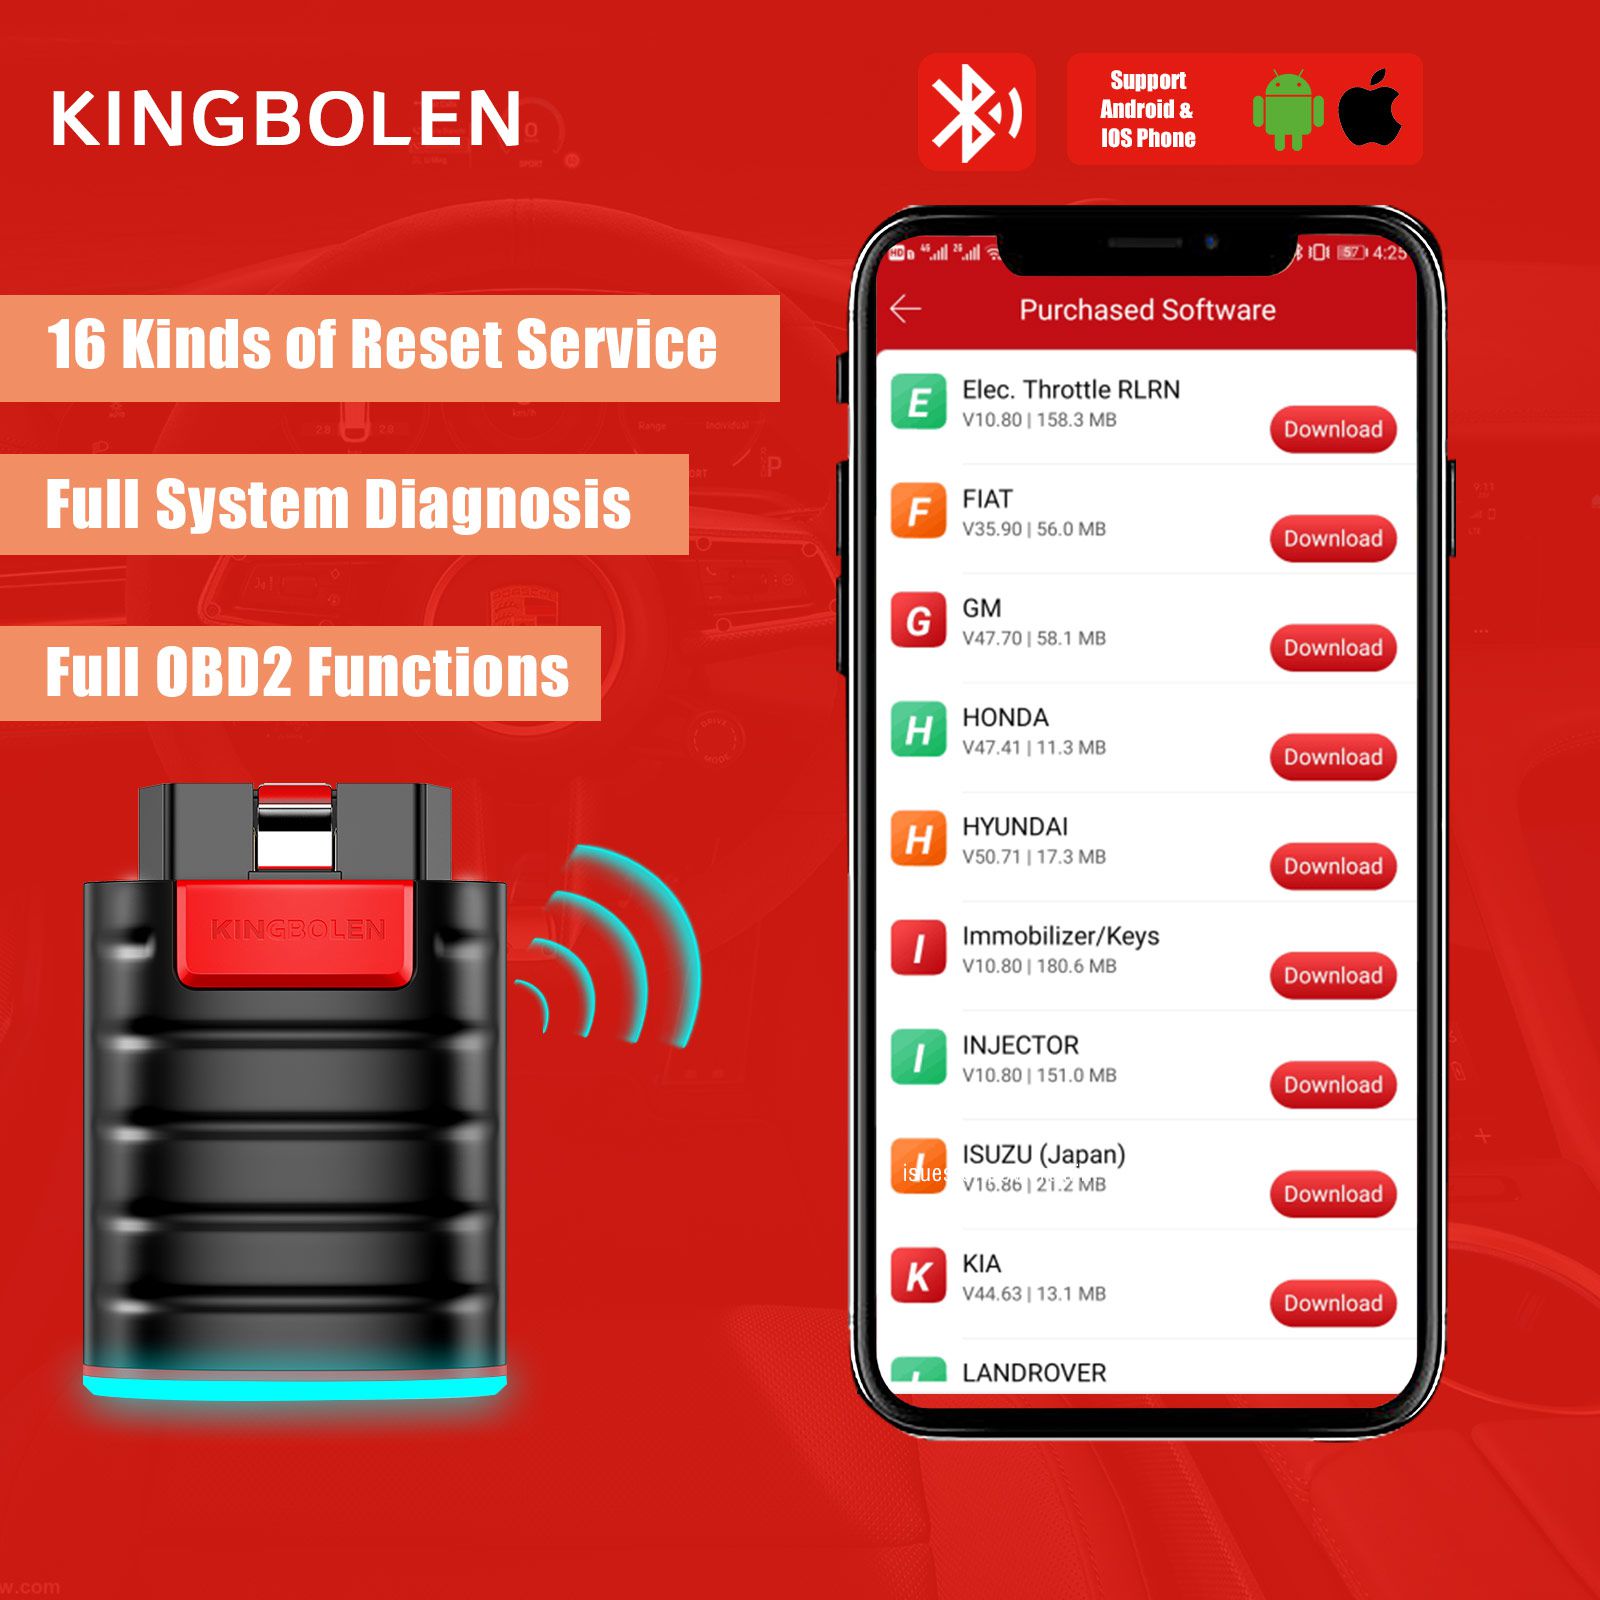 2023 Newest KINGBOLEN EDIAG Full System OBD2 Diagnostic Tool with All Brands License Free Update for One Year